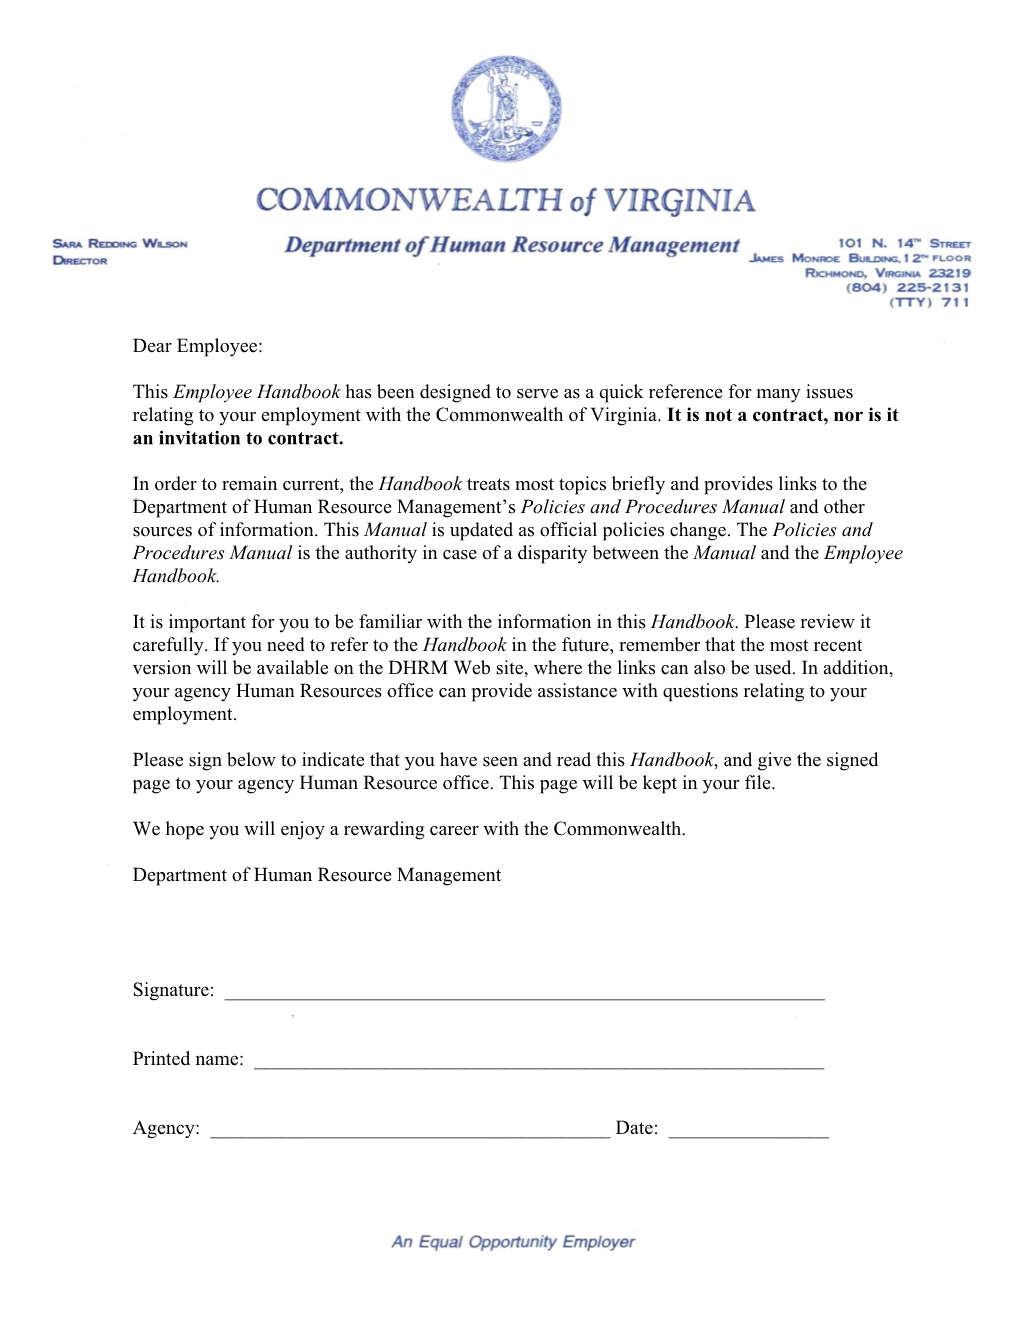 This Employee Handbook Has Been Designed to Serve As a Quick Reference for Many Issues Relating to Your Employment with the Commonwealth of Virginia